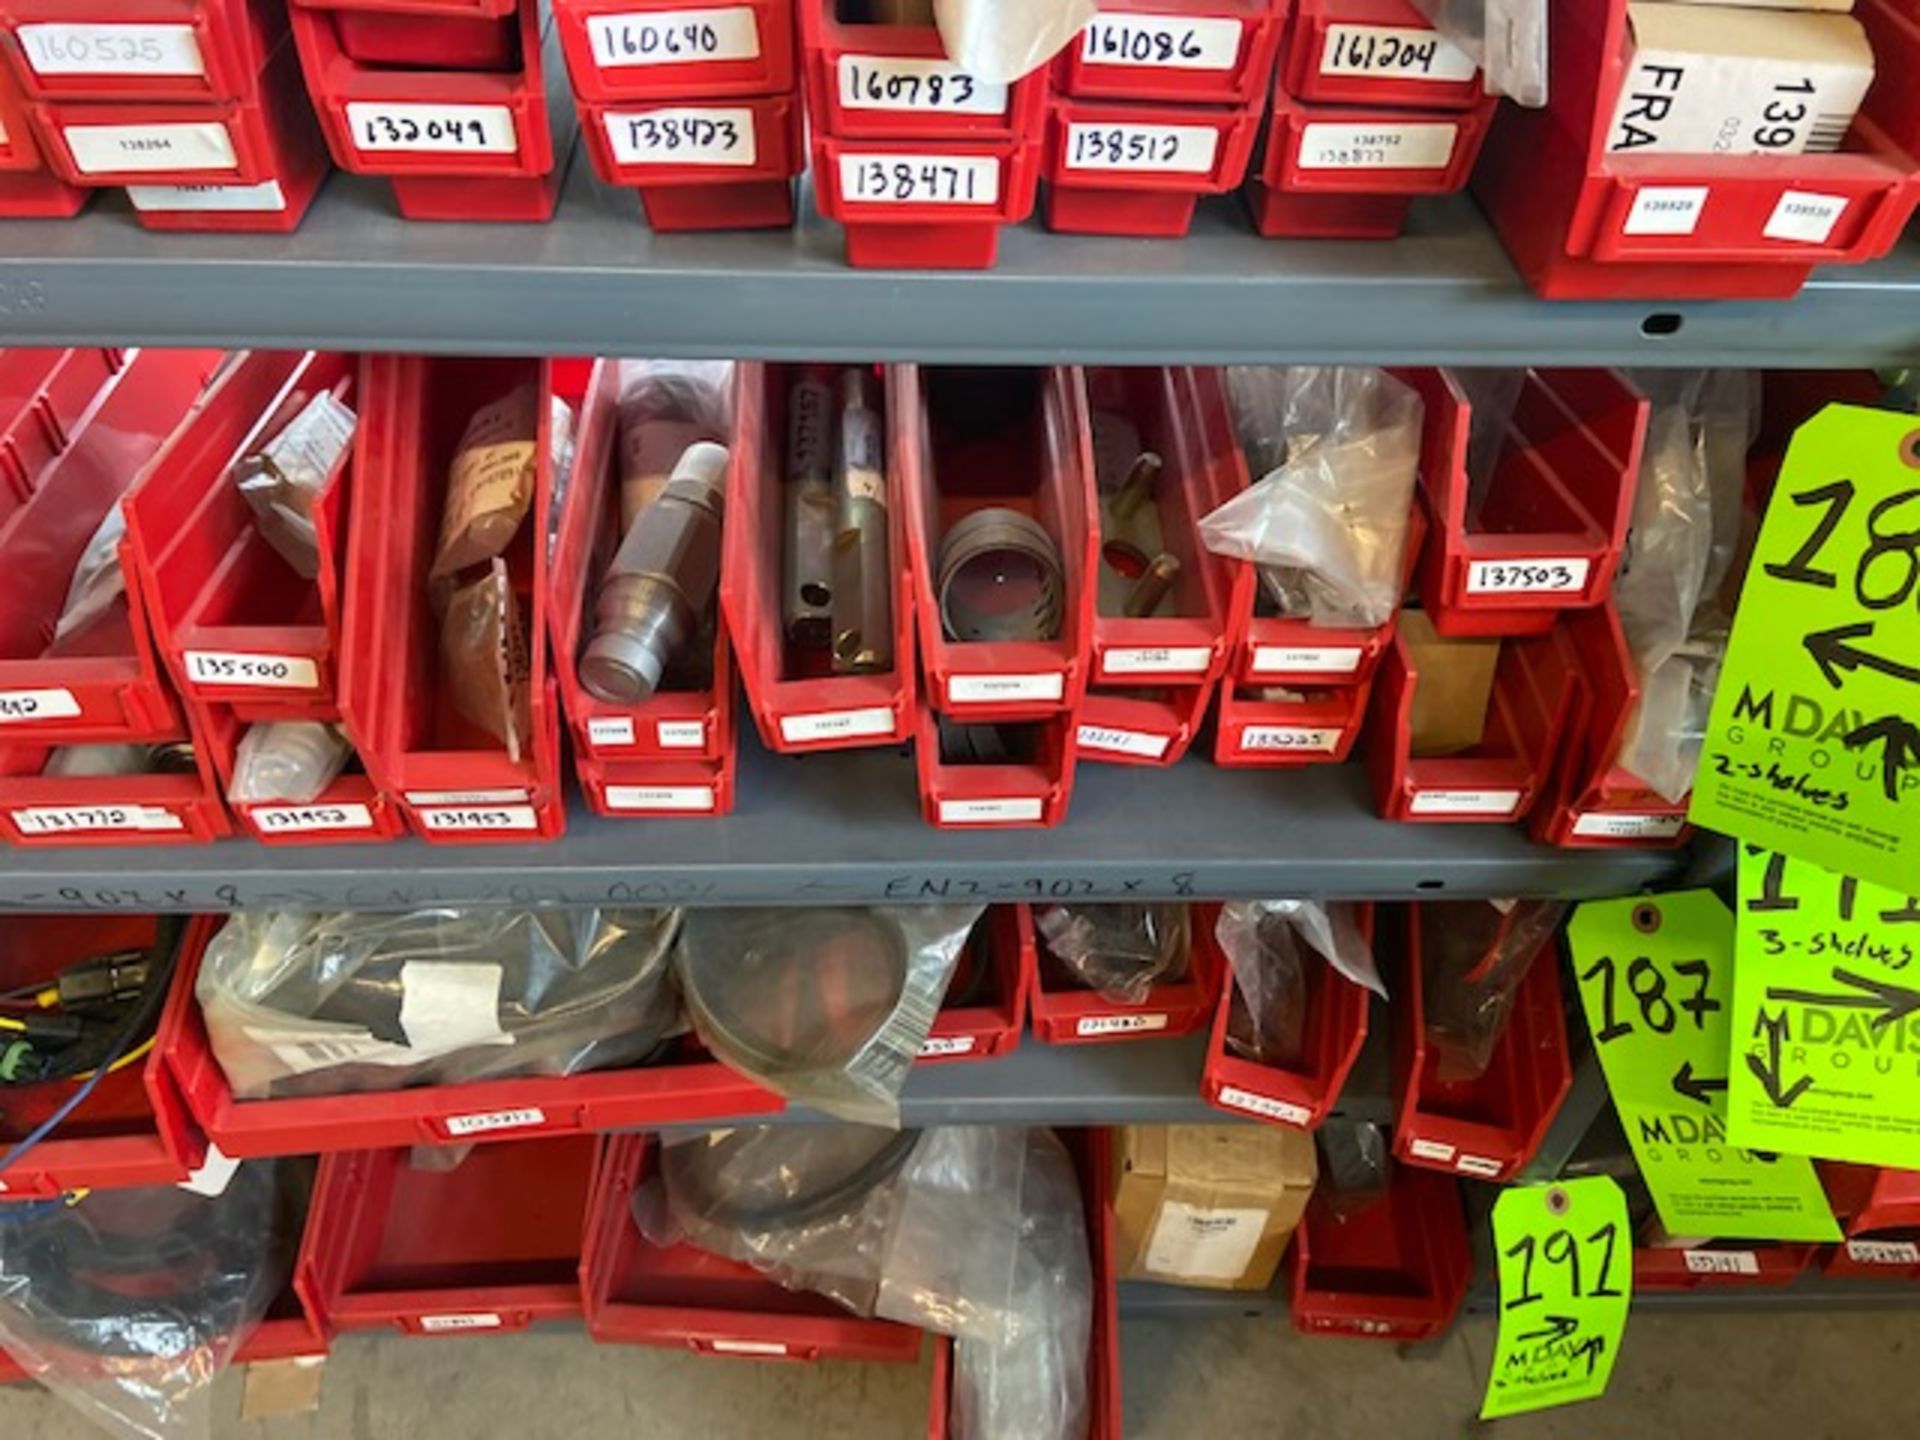 ASSORTED PARTS BY GEHL, MUSTANG, XPRT AND OTHERS, INCLUDES LATCH PINS, CLIPS, GASKETS, PNEUMATIC